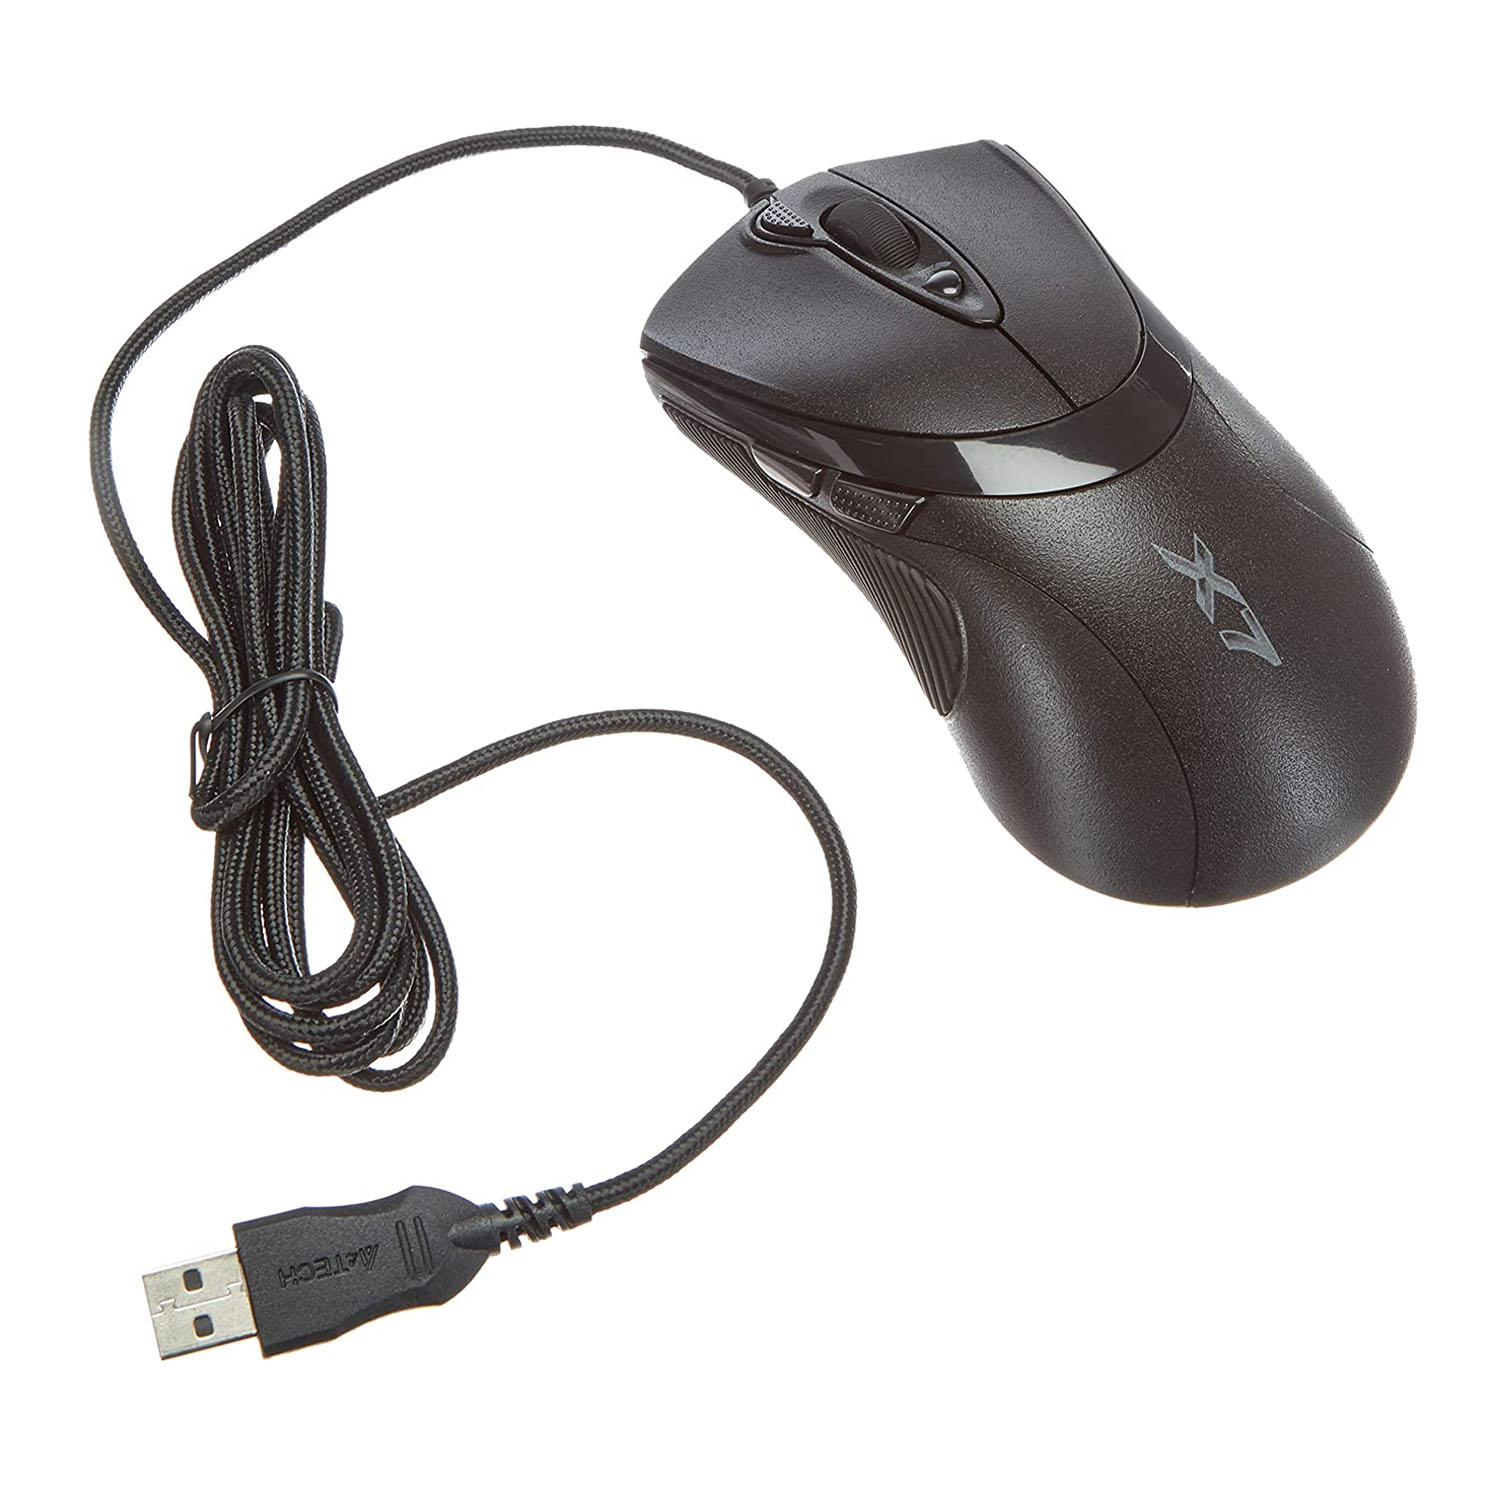 A4Tech X748K Gaming Mouse